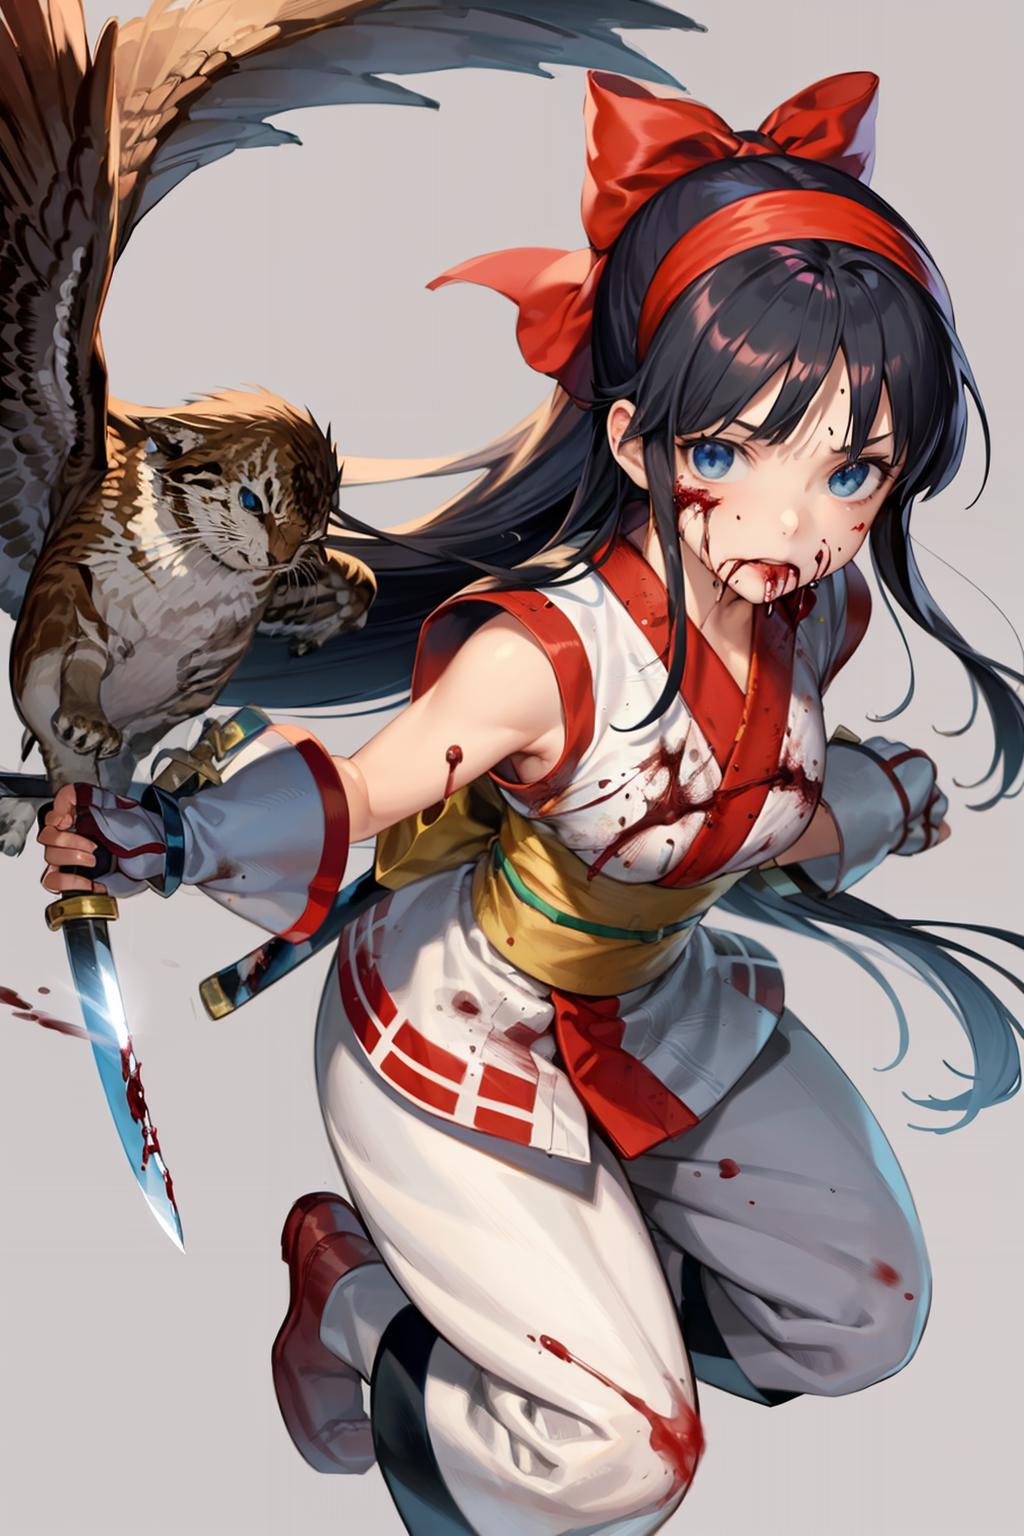 Anime-style character with blood on her face and arm holding a sword and a bird.